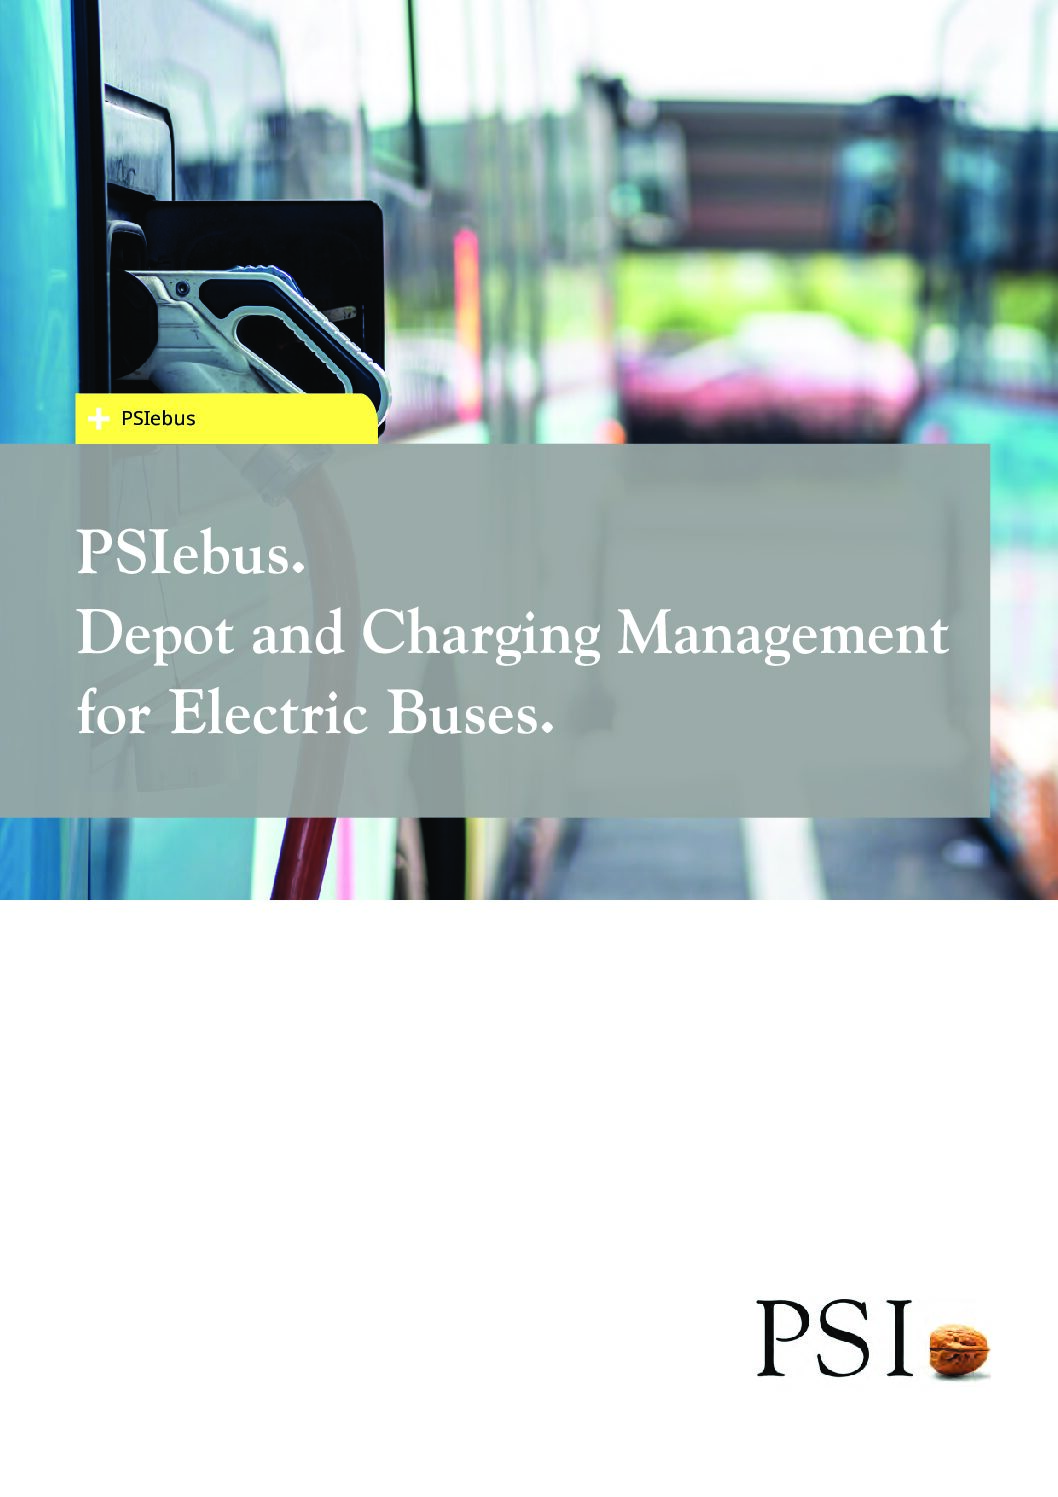 PSIebus: Depot and Charging Management for Electric Buses